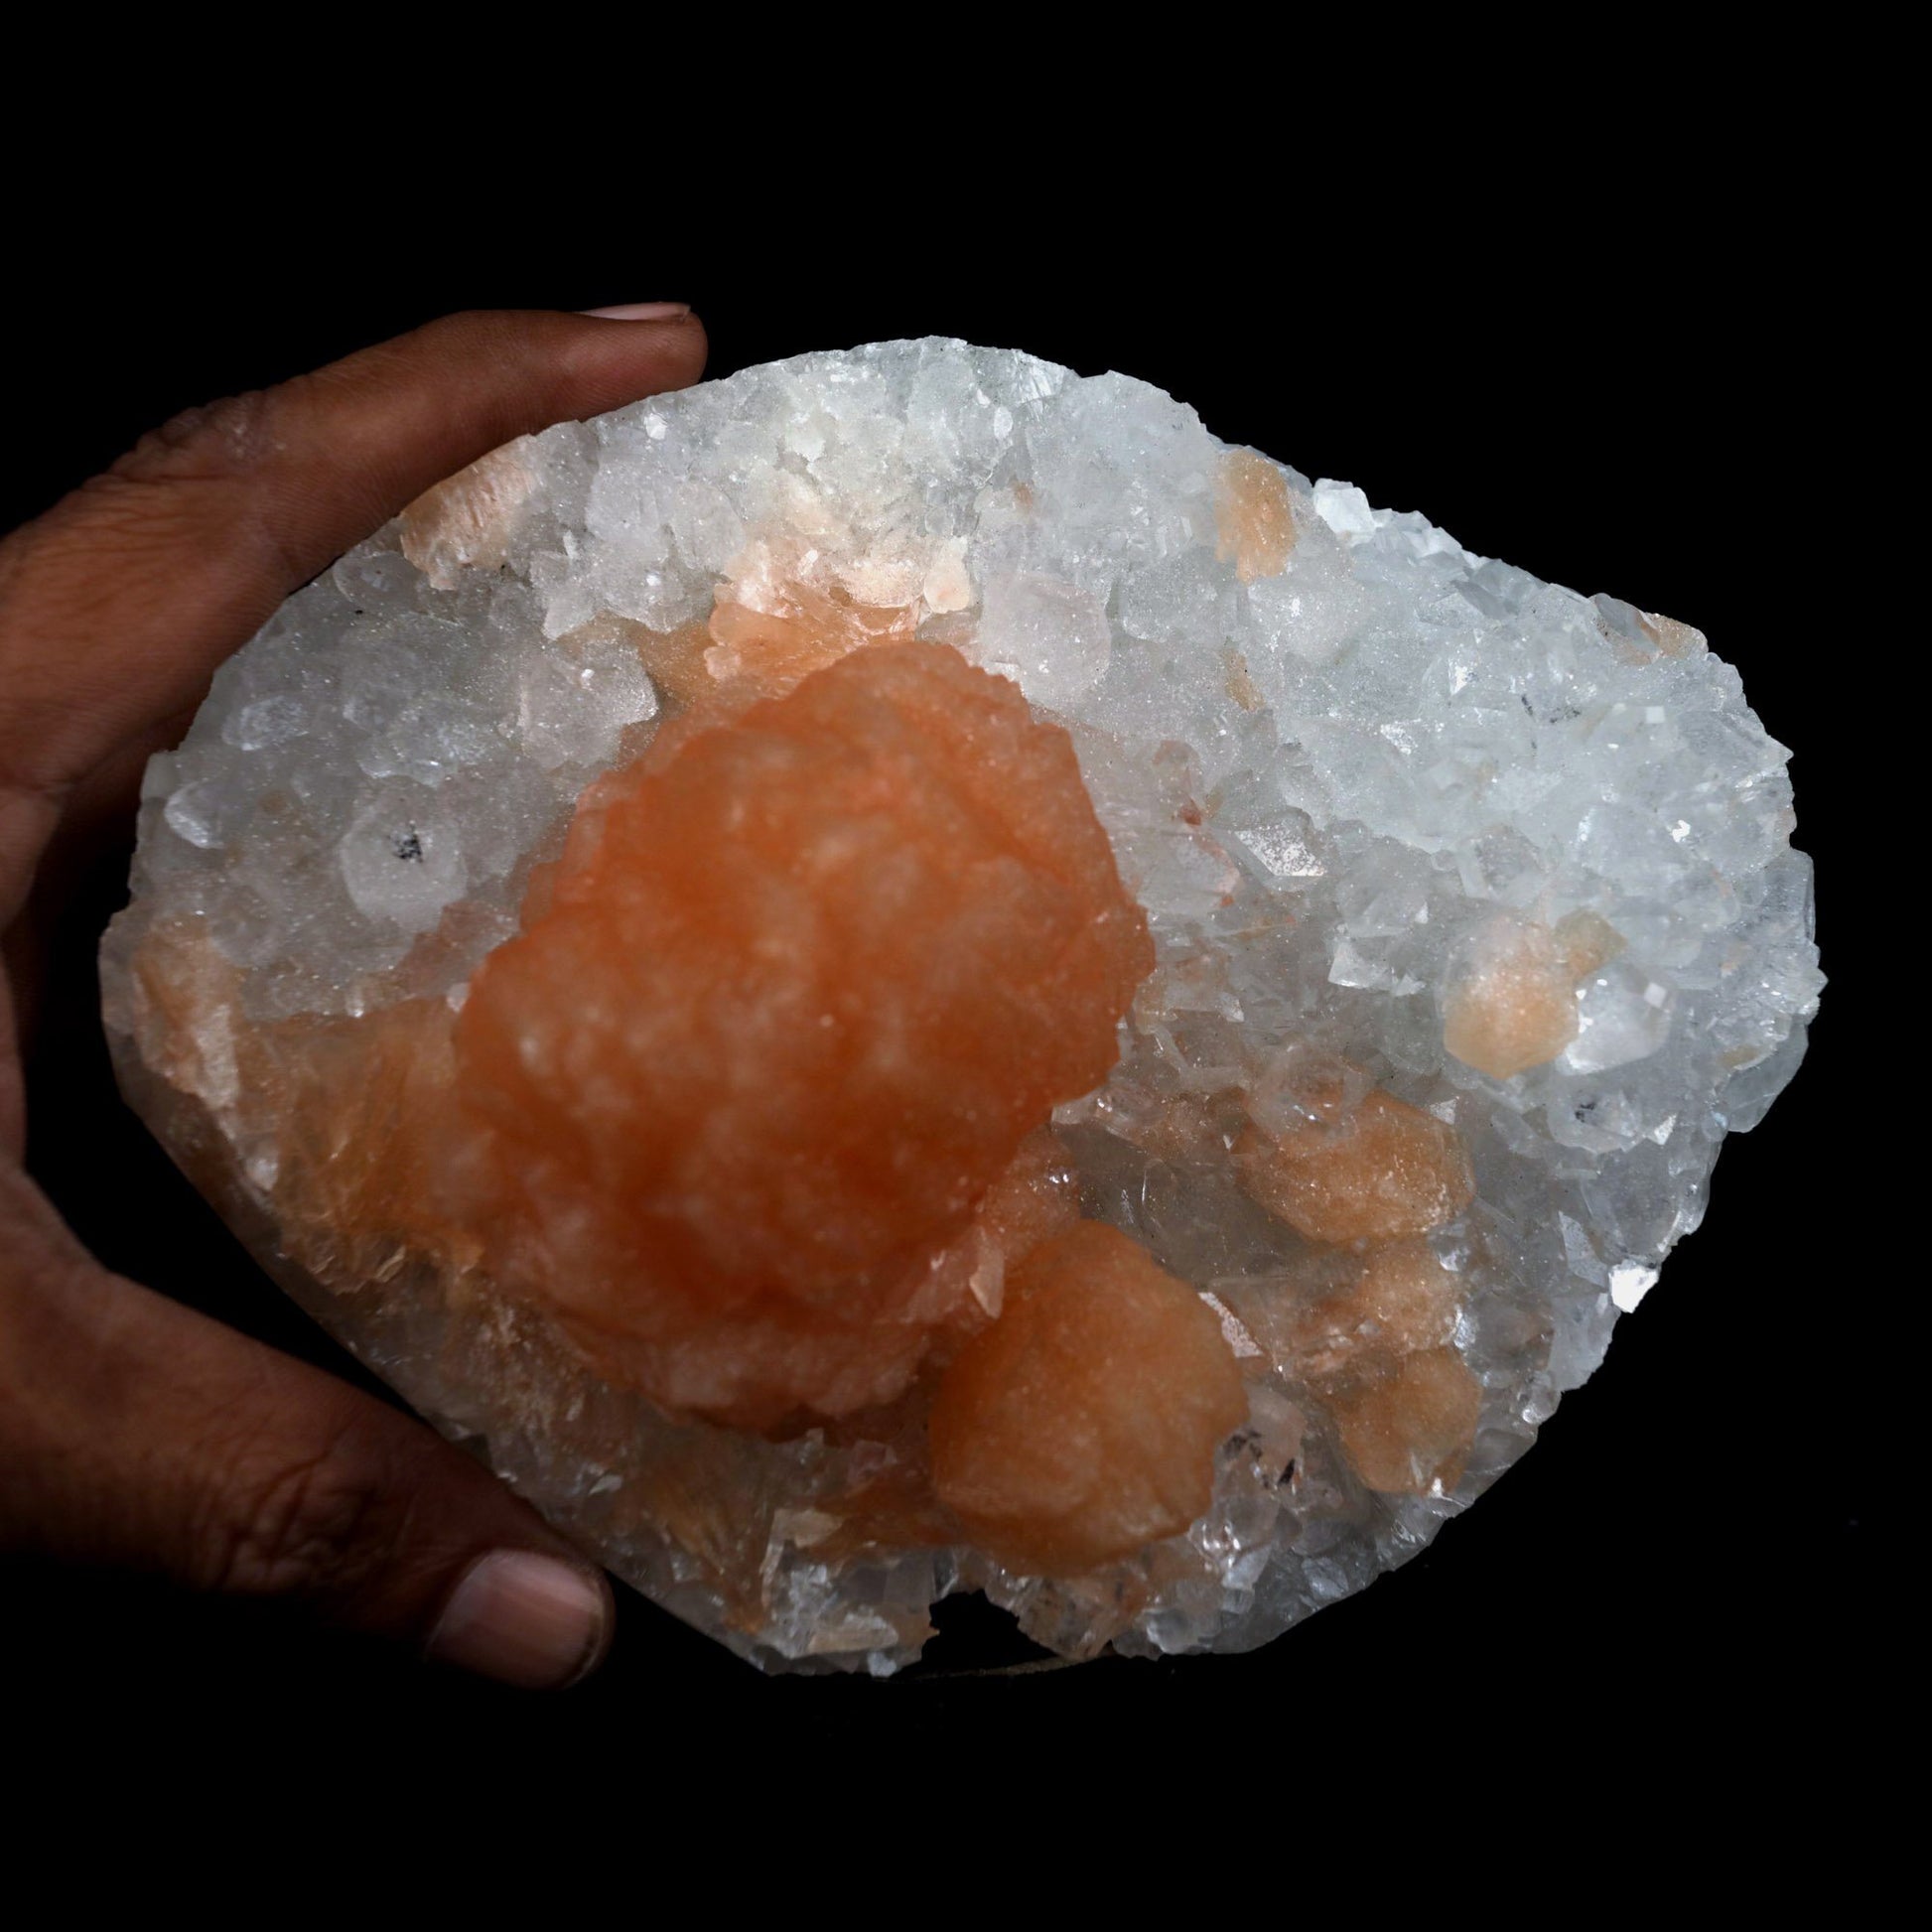 Stilbite Orange on Apophyllite Microcrystaline Natural Mineral Specime…  https://www.superbminerals.us/products/stilbite-orange-on-apophyllite-microcrystaline-natural-mineral-specimen-b-4682  Features: A magnificent, razor-sharp, vitreous, soft peach-colored "sword"-shaped group of Stilbite is flaring out of a group of fine quality, razor-sharp, lustrous, prismatic Apophyllite crystals on a little quantity of white Chalcedony in this eye-catching three-dimensional display piece. The most massive Apophyllite